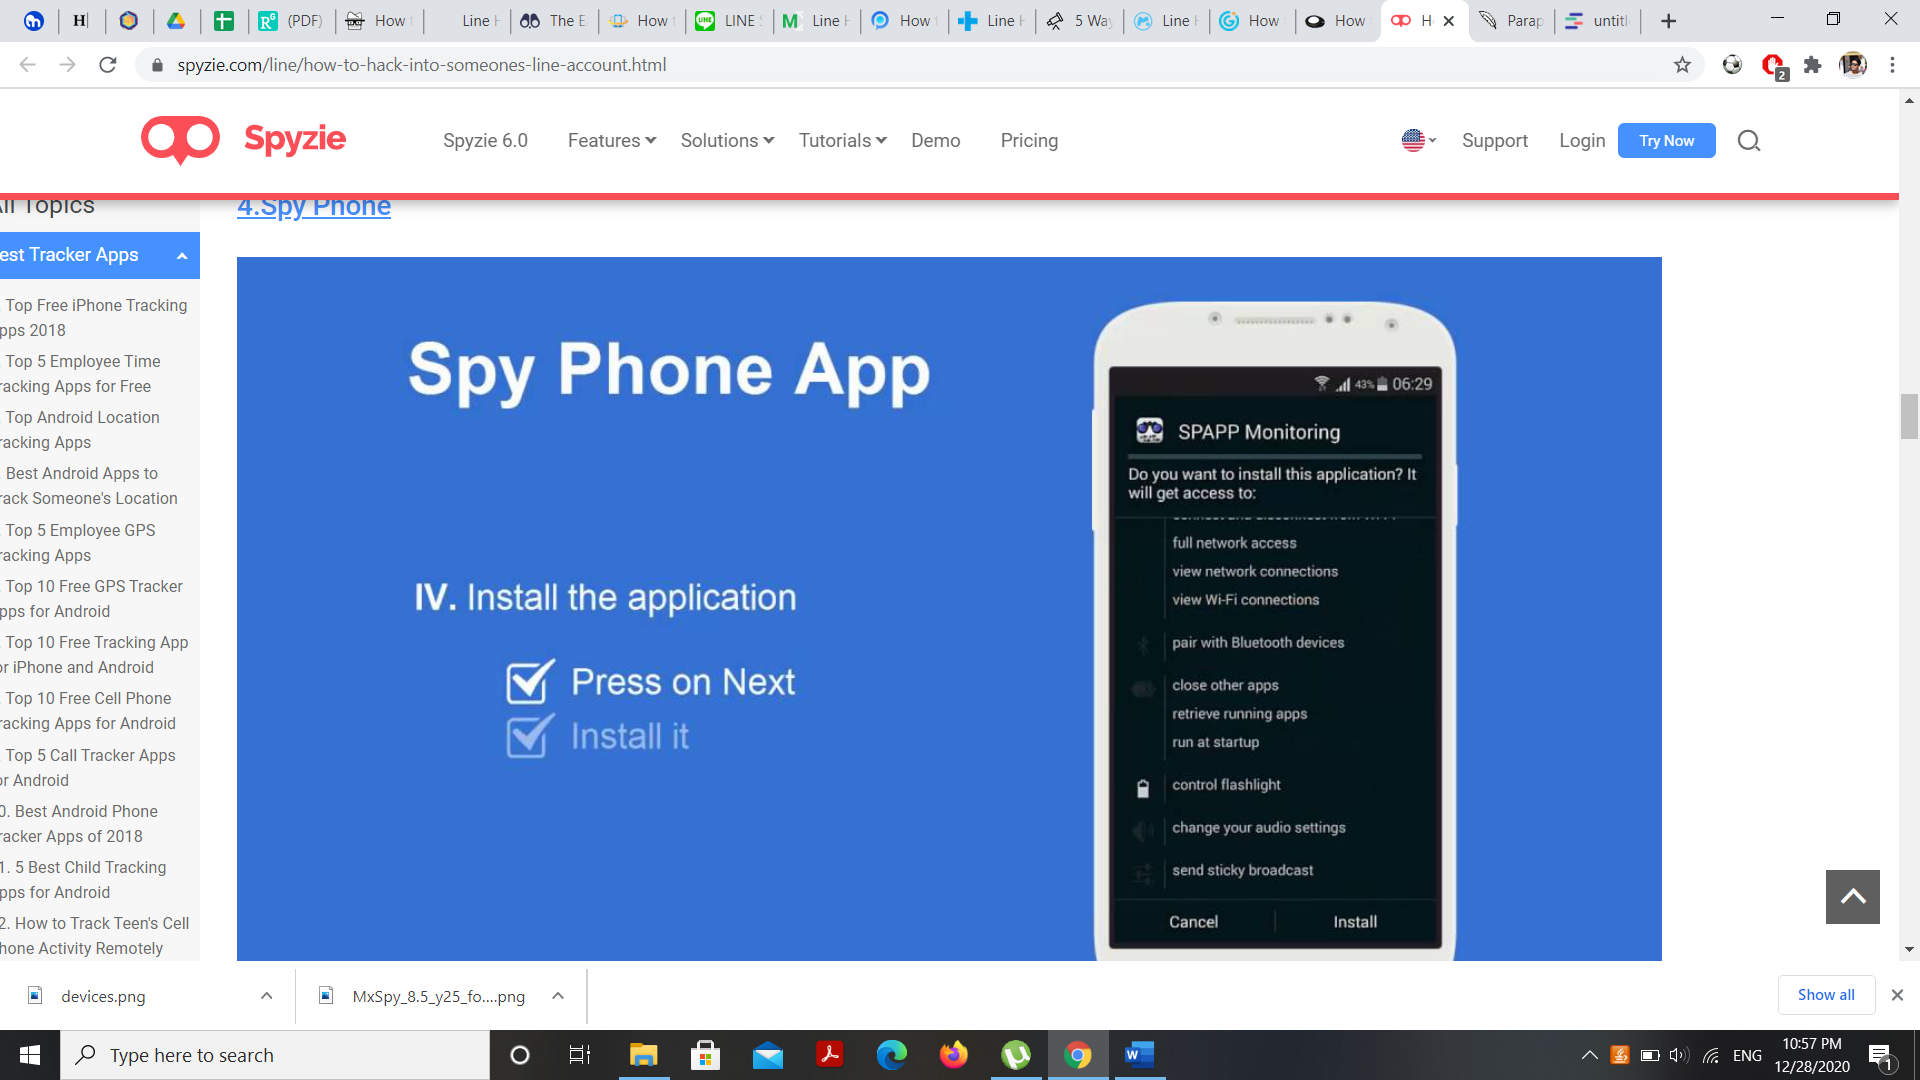 Spy Phone : How to hack line messages